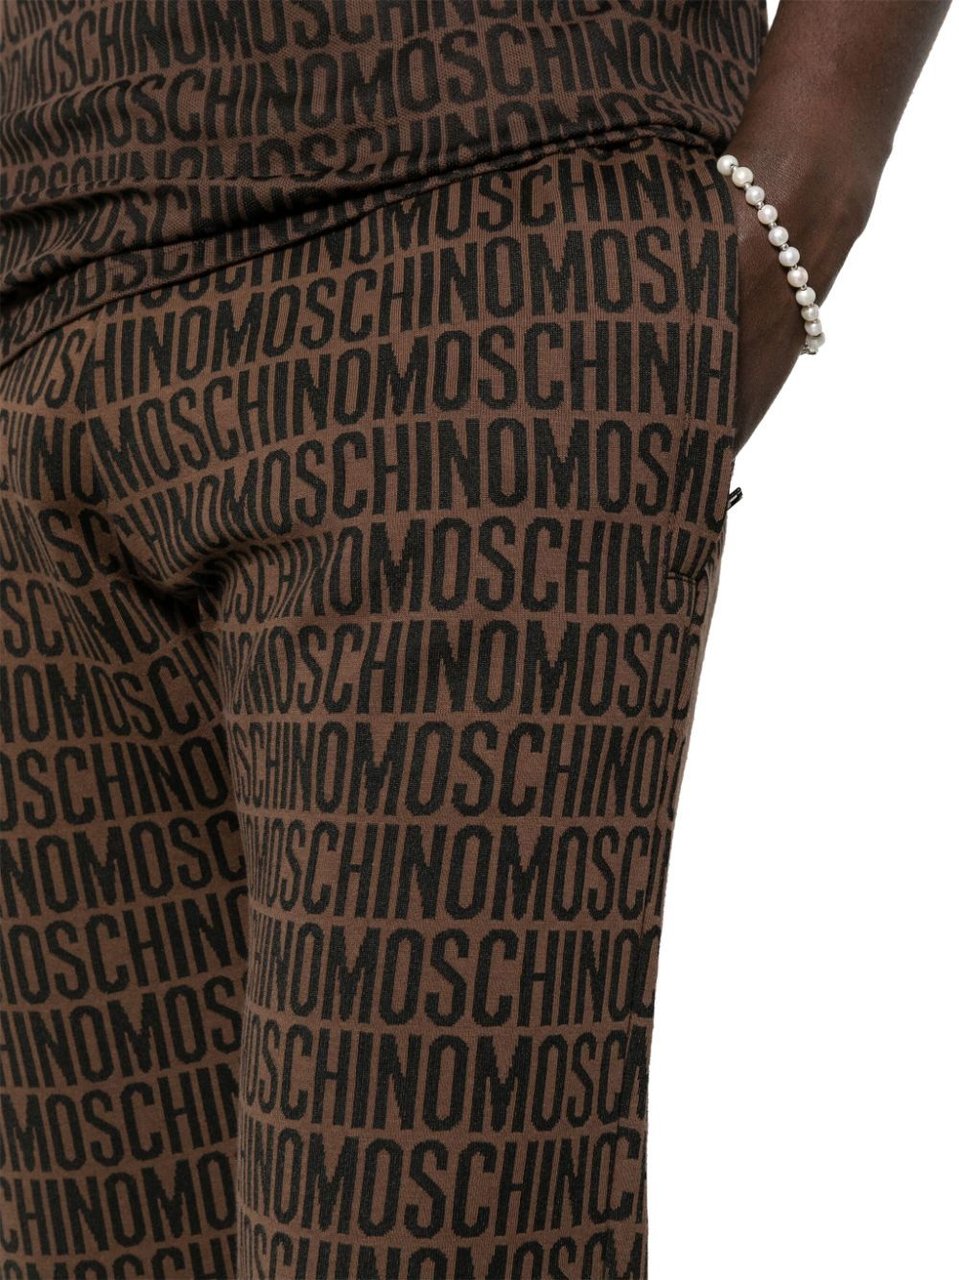 Moschino Trousers Brown Brown Bruin